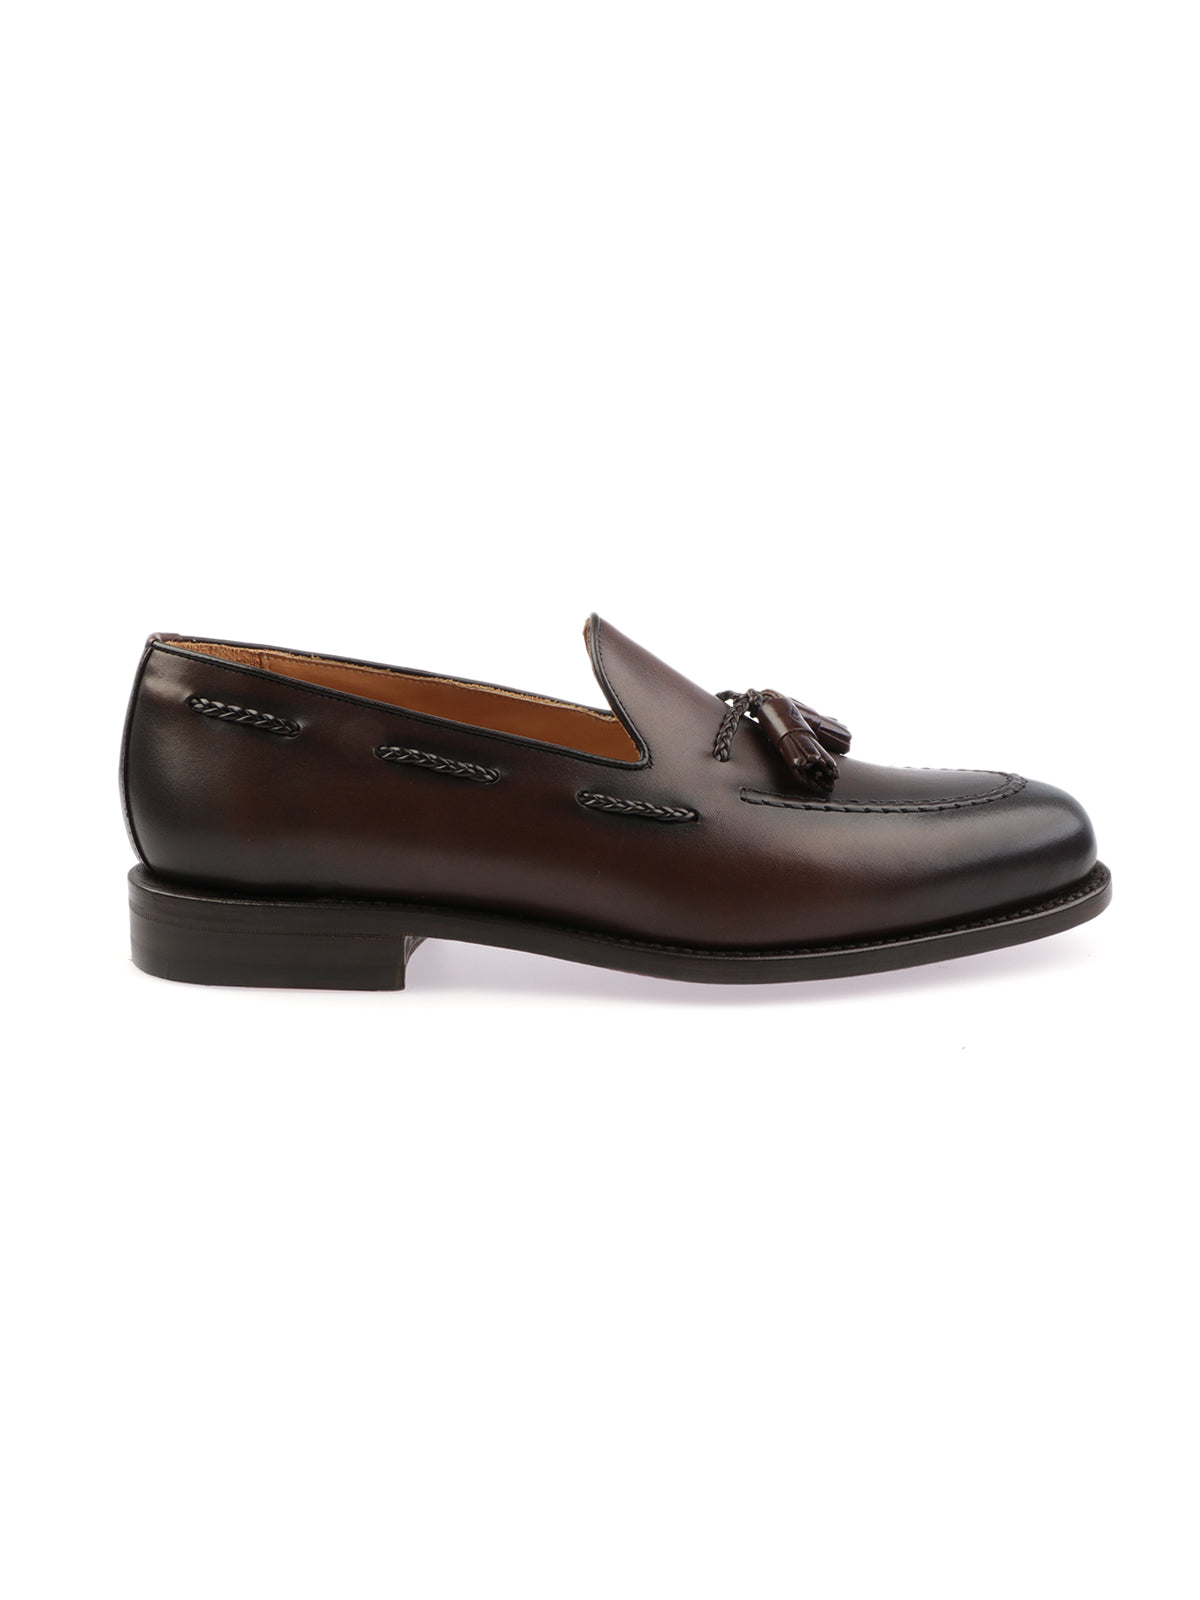 BERWICK LOAFER WITH TASSELS BROWN - 4340